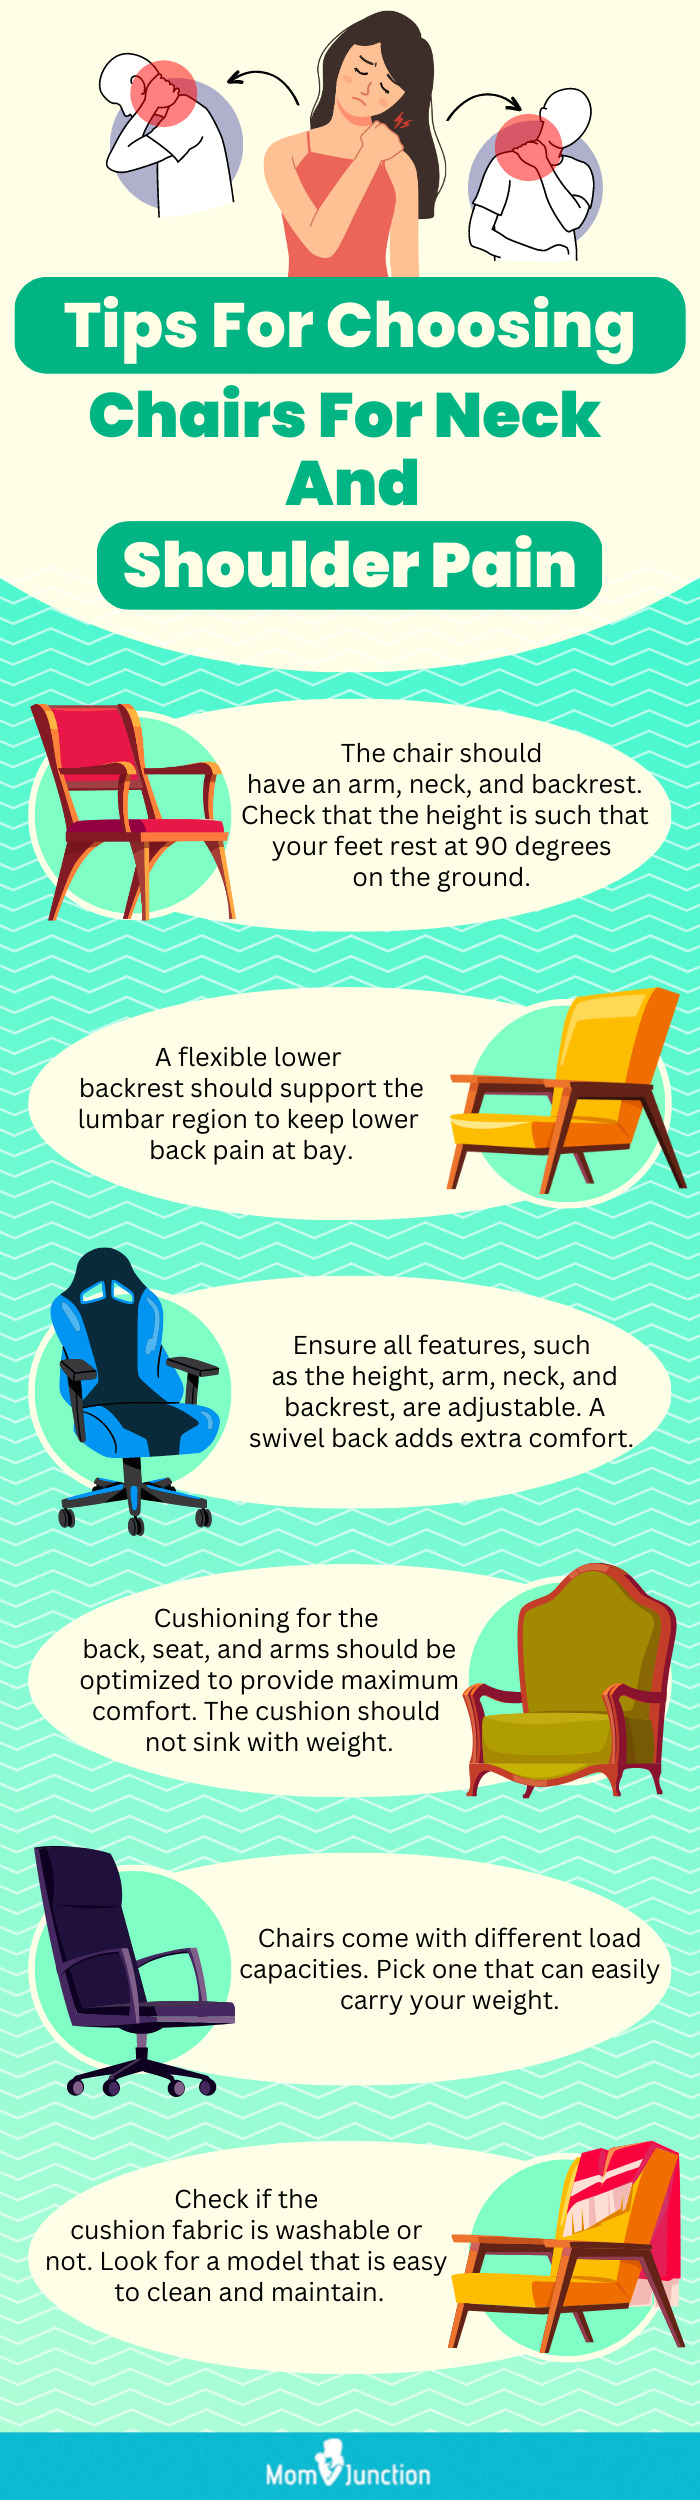 Tips For Choosing Chairs For Neck And Shoulder Pain